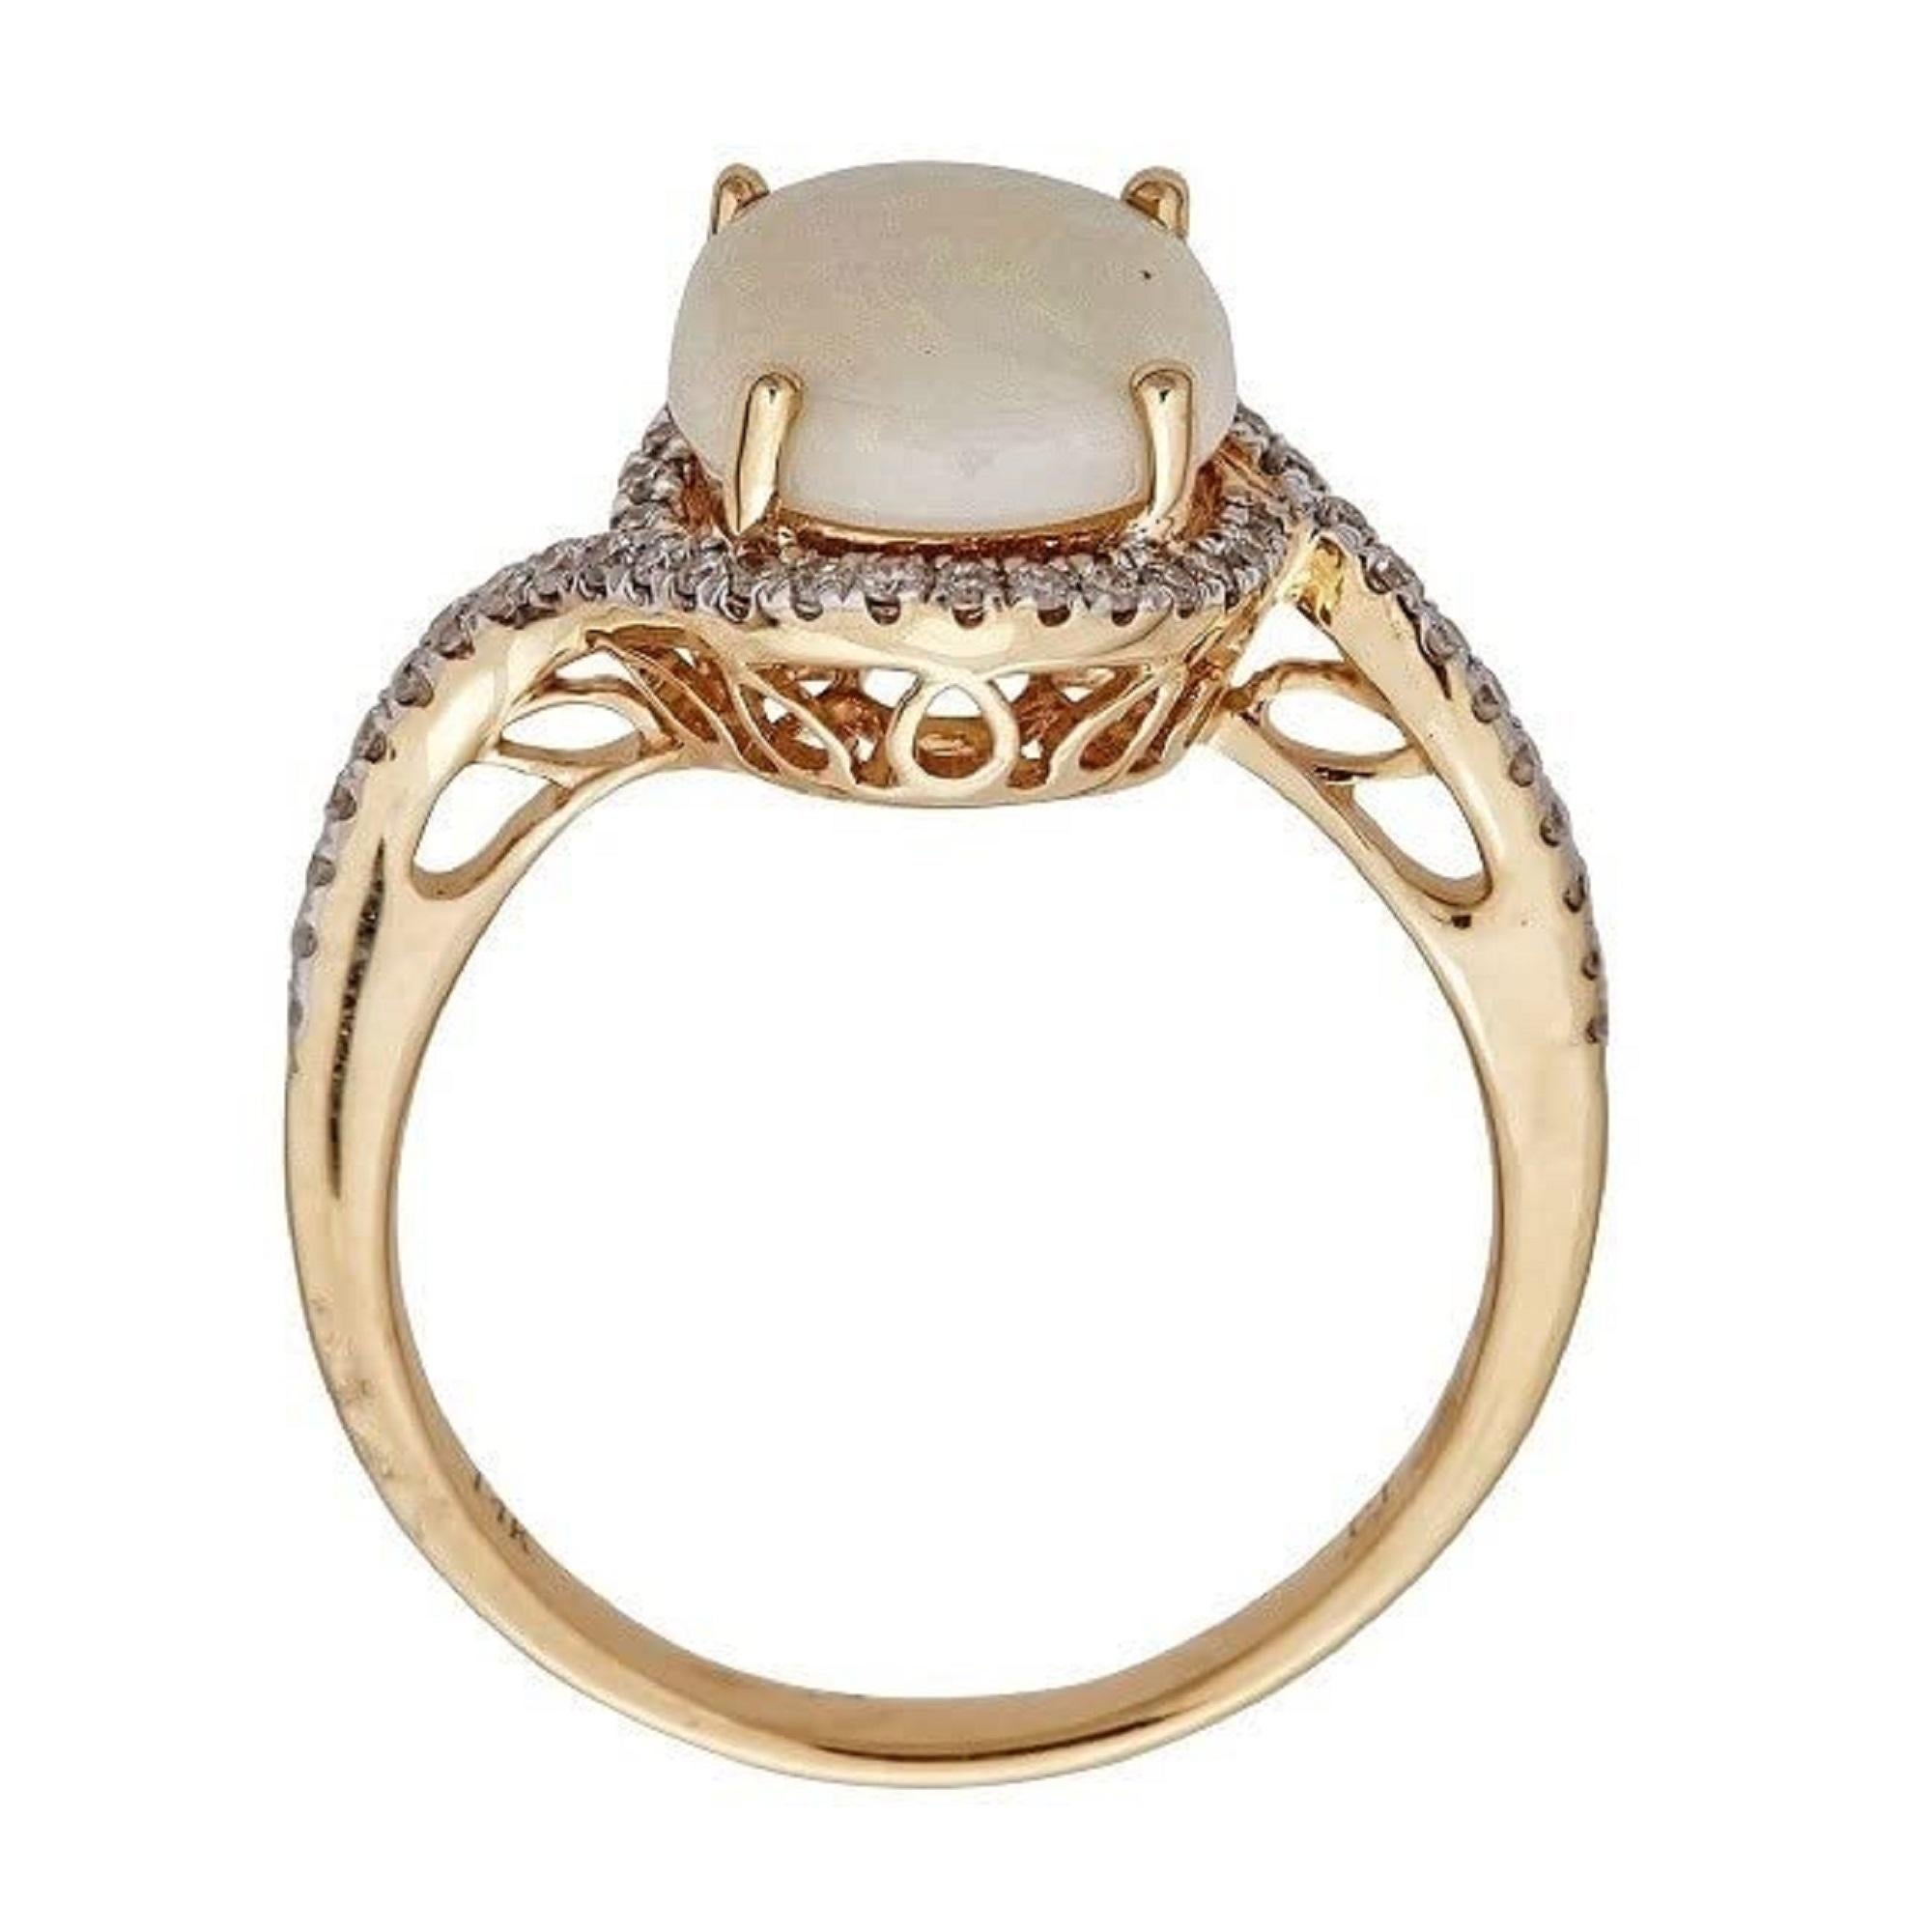 Decorate yourself in elegance with this Ring is crafted from 14-karat Yellow Gold by Gin & Grace Ring. This Ring is made up of 9x11 mm Oval-cab Ethiopian Opal (1Pcs) 2.31 Carat and Round-cut White Diamond (46 Pcs) 0.23 Carat. This Ring is weight